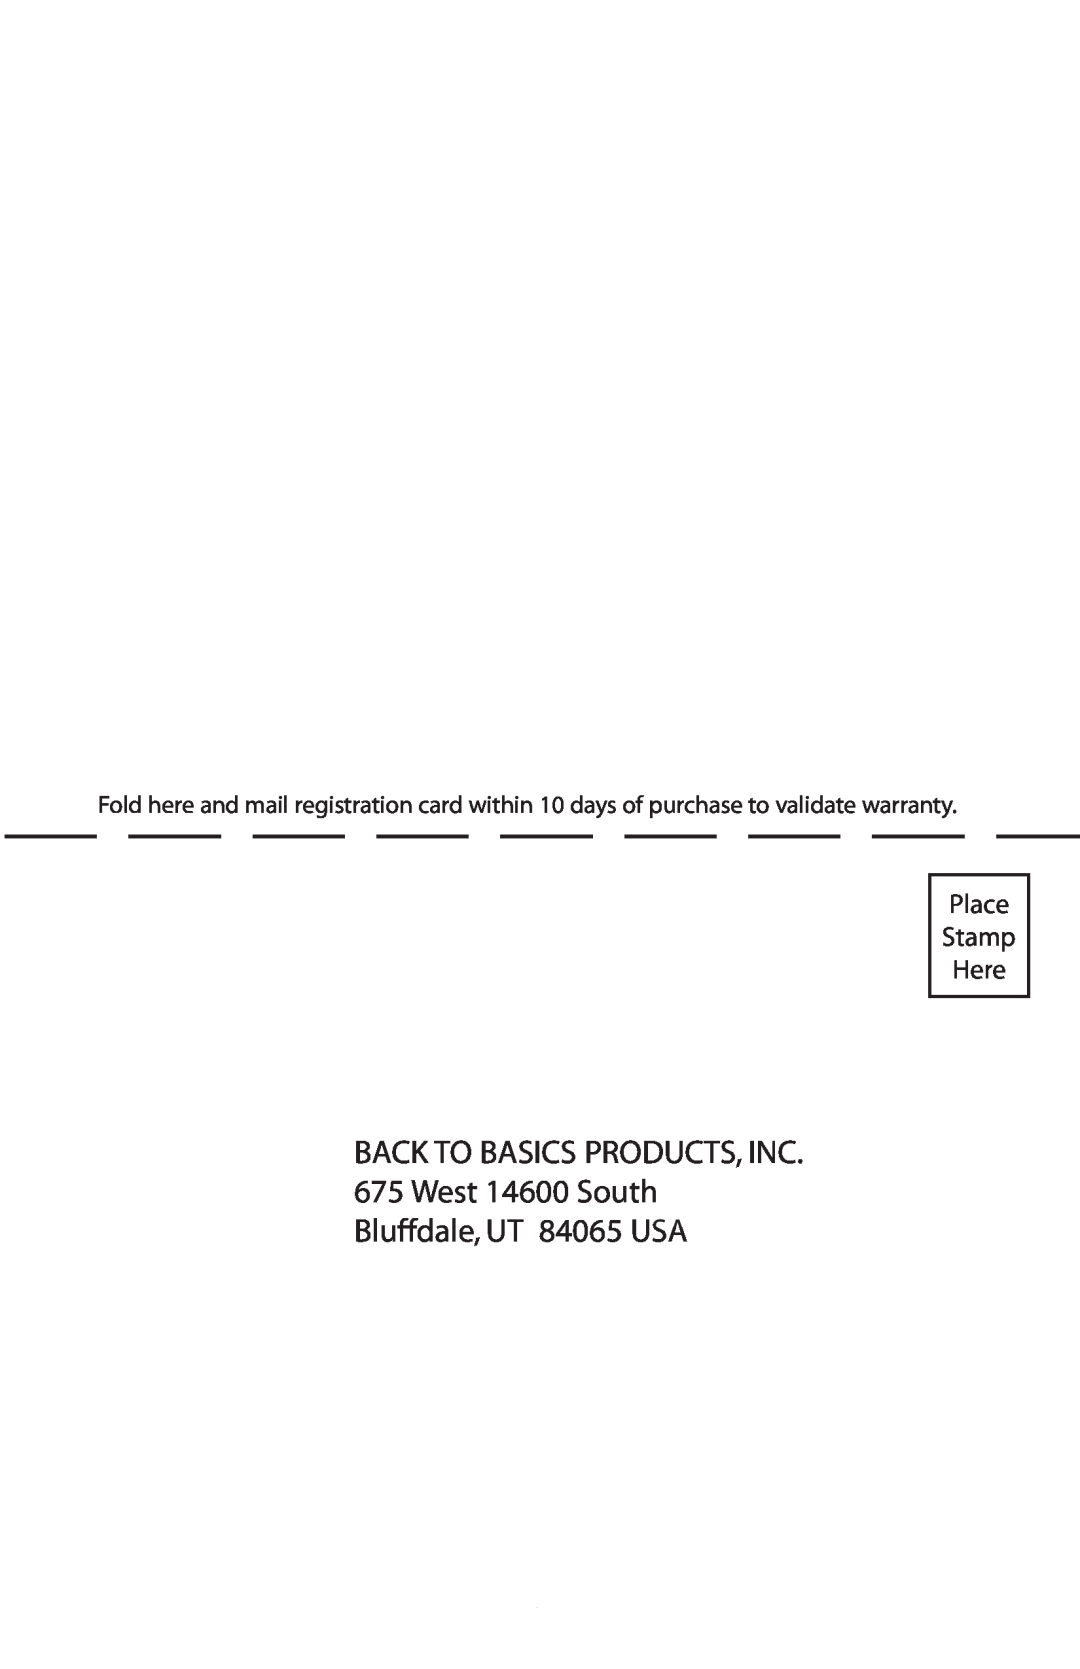 West Bend Back to Basics SCL5 BACK TO BASICS PRODUCTS, INC 675 West 14600 South, Bluffdale, UT 84065 USA, Place Stamp Here 